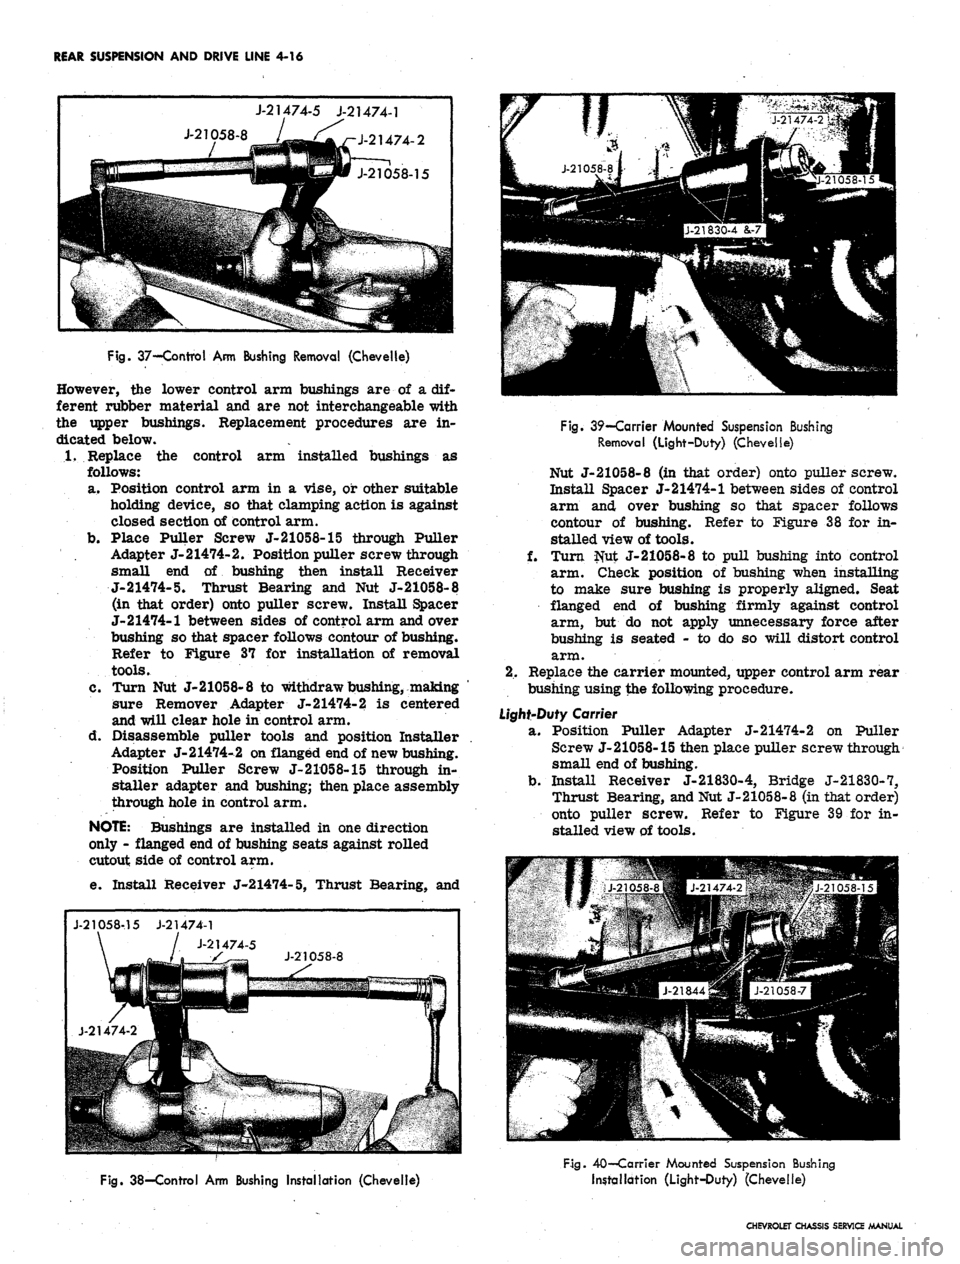 CHEVROLET CAMARO 1967 1.G Chassis Service Manual 
REAR SUSPENSION AND DRIVE LINE 4-16

J-21474-5 J-21474-1

J-21058-8 /__* A r-j-21474-2

Fig.
 37-Control Arm Bushing Removal (Chevelle)

However, the lower control arm bushings are of a dif-

ferent 